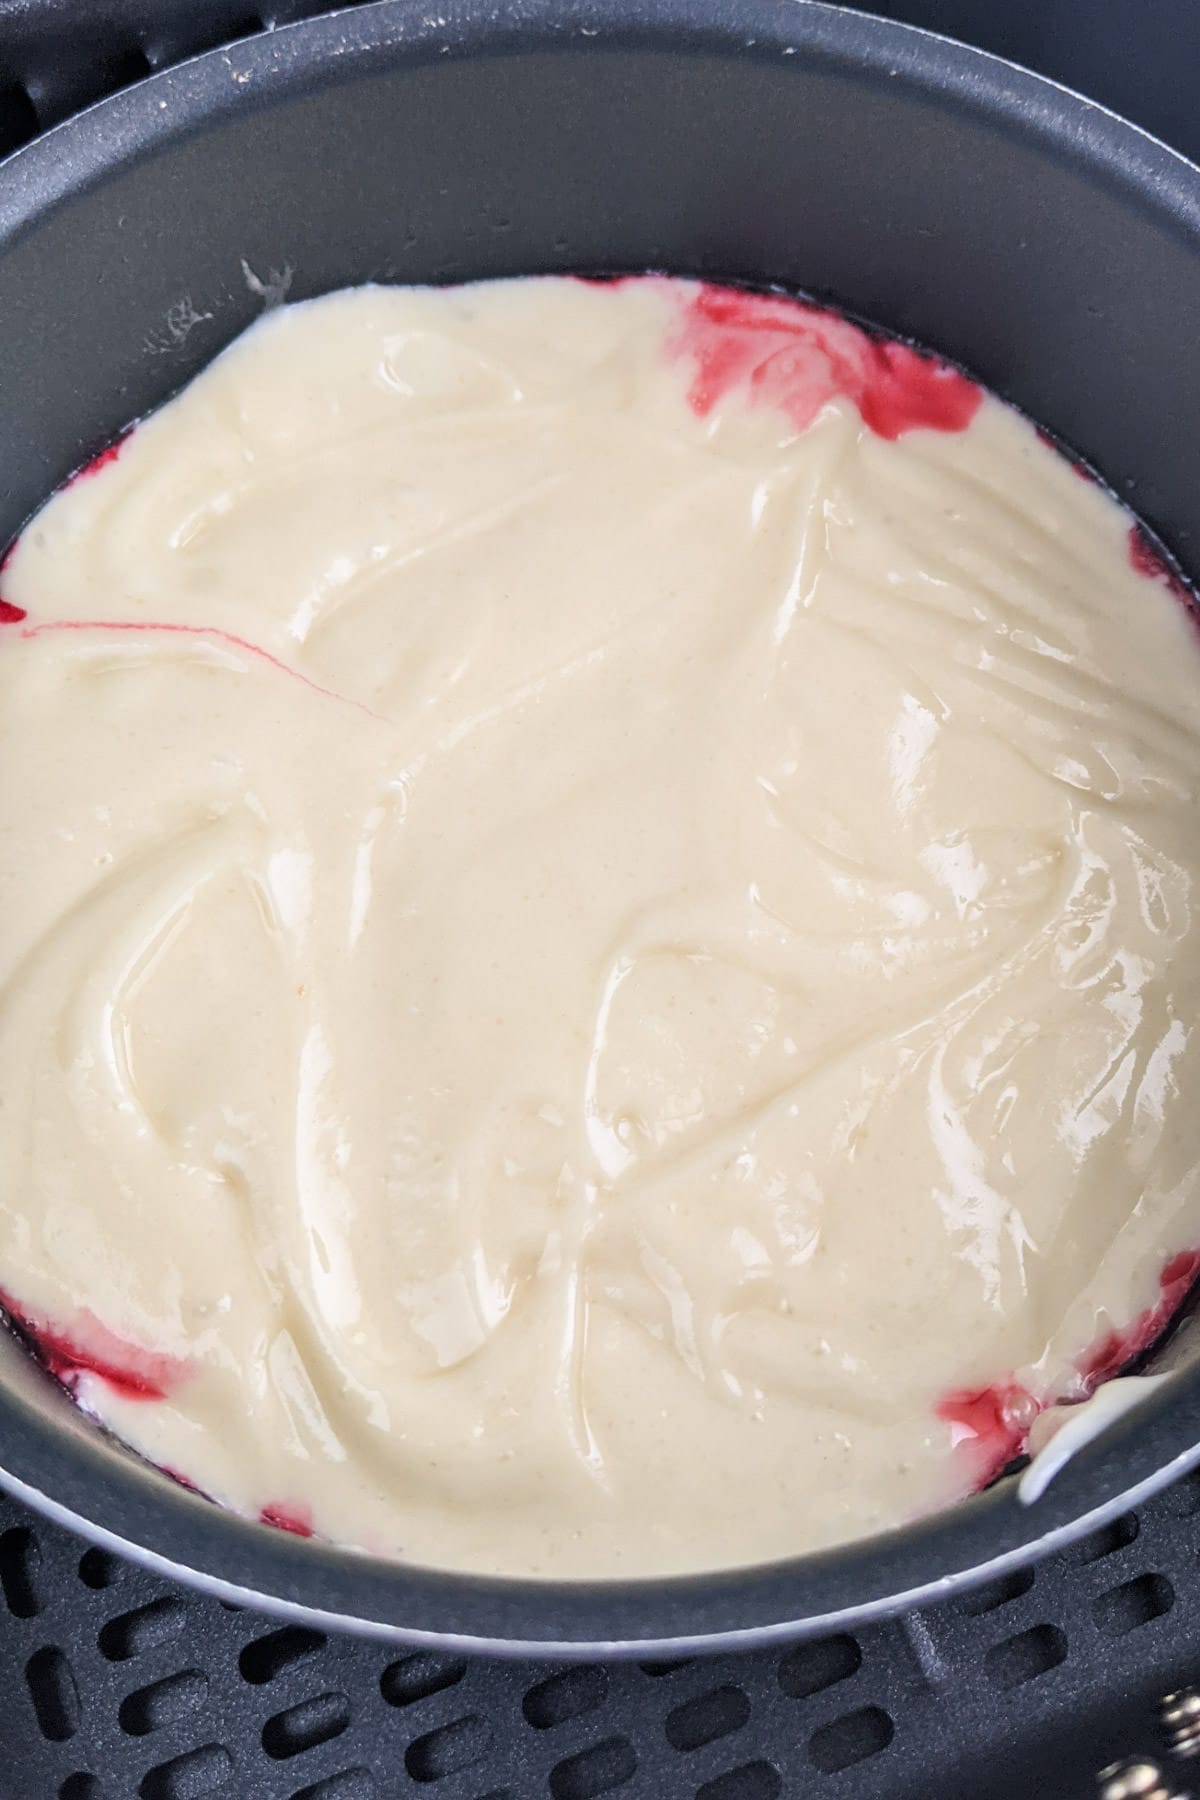 Cream for the plum cake in the air fryer.